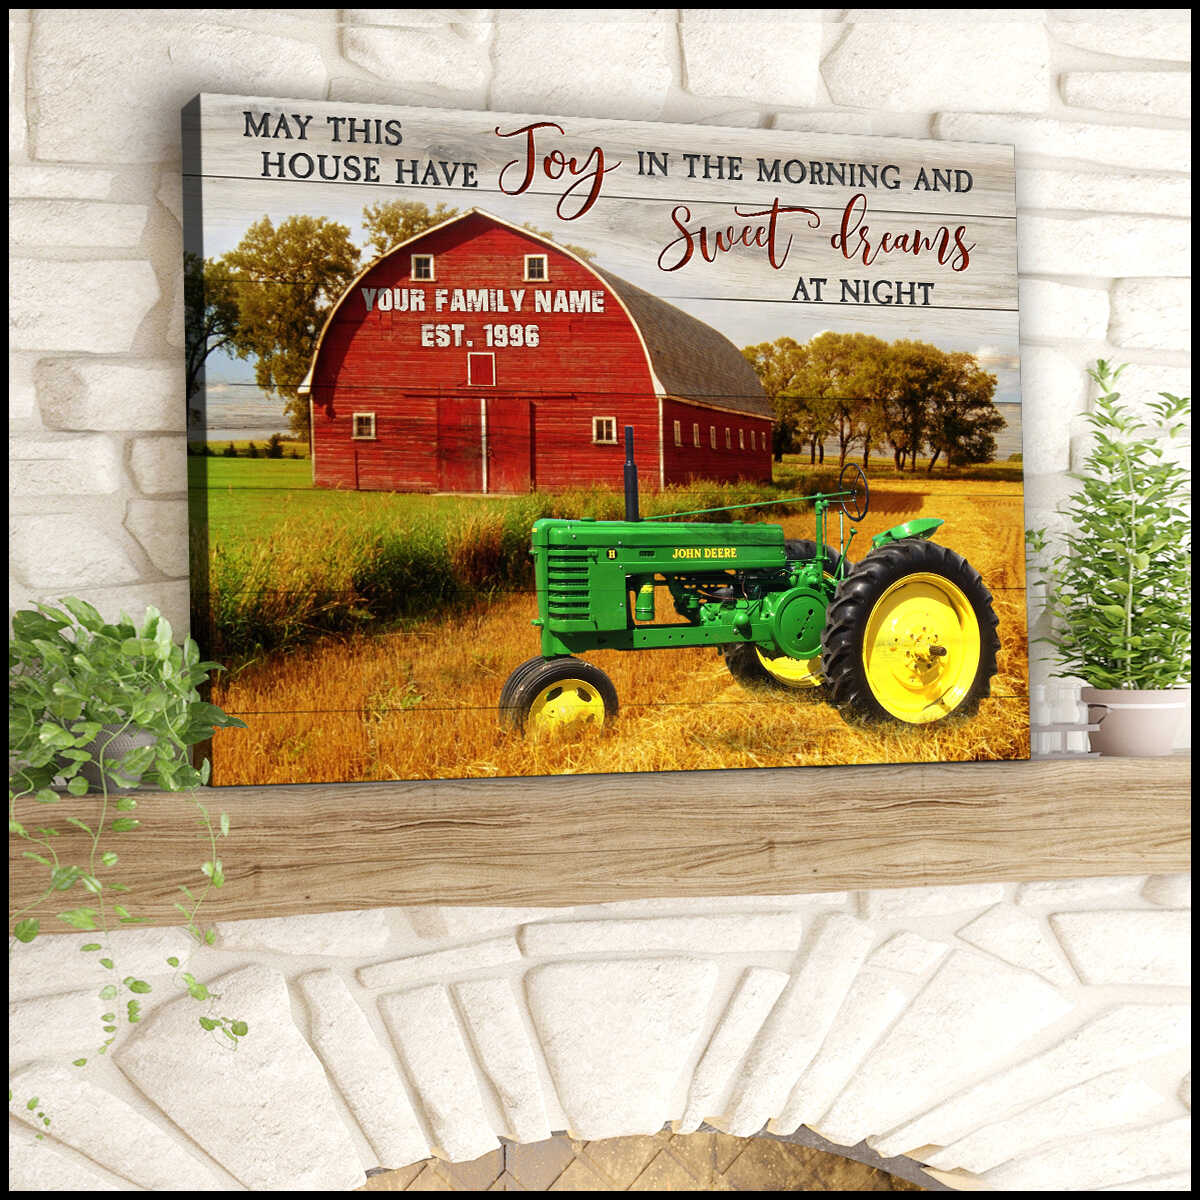 Personalized Country Farm And John Deere Tractor May This House Have Joy In The Morning And Sweet Dreams At Night Custom Name And Date Farmhouse Canvas Prints Wall Art Decor